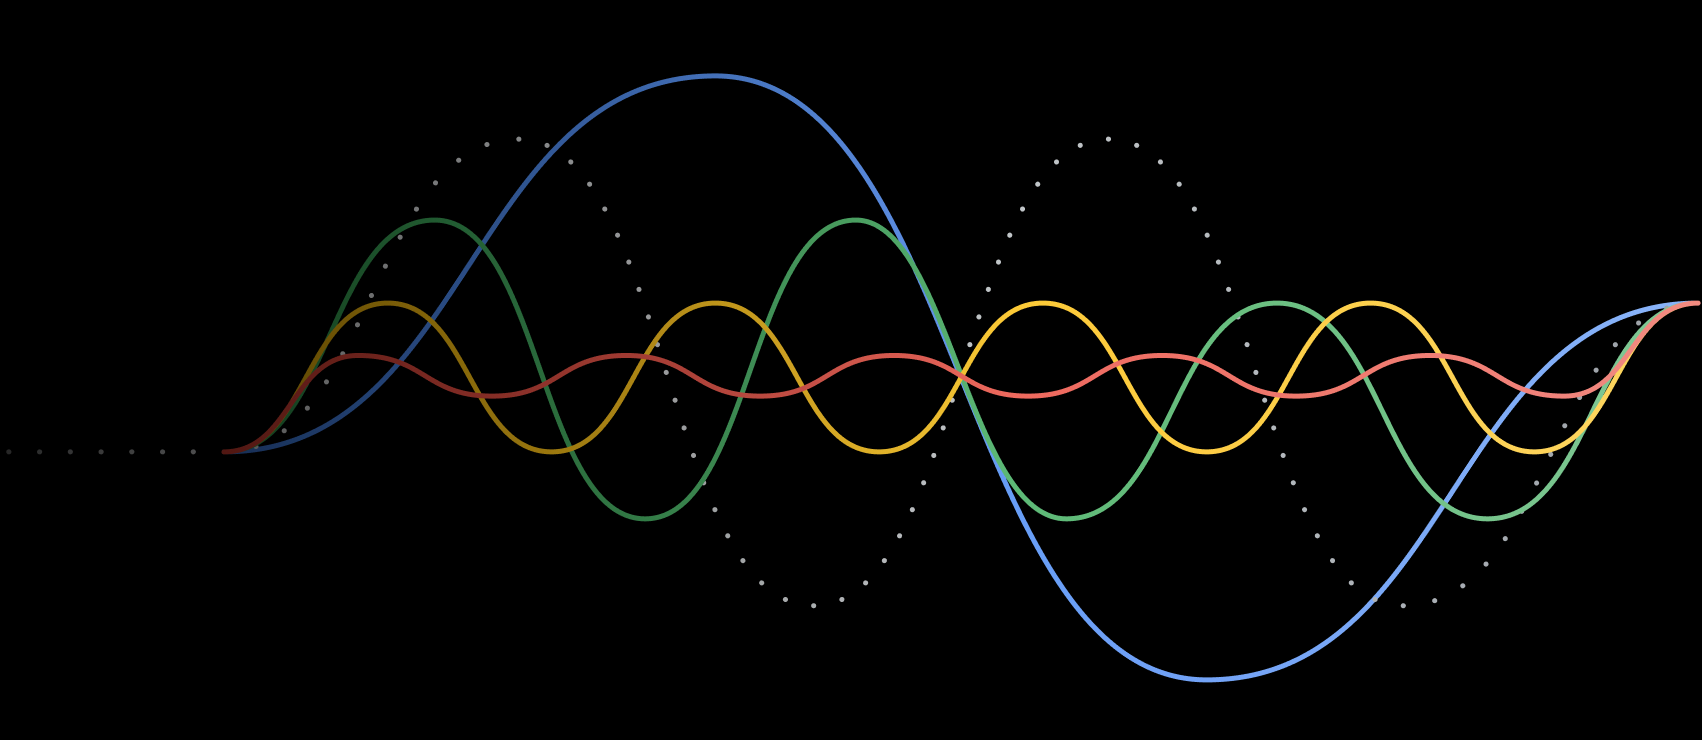 Sound wave illustration in lines of blue, yellow, red, and green.